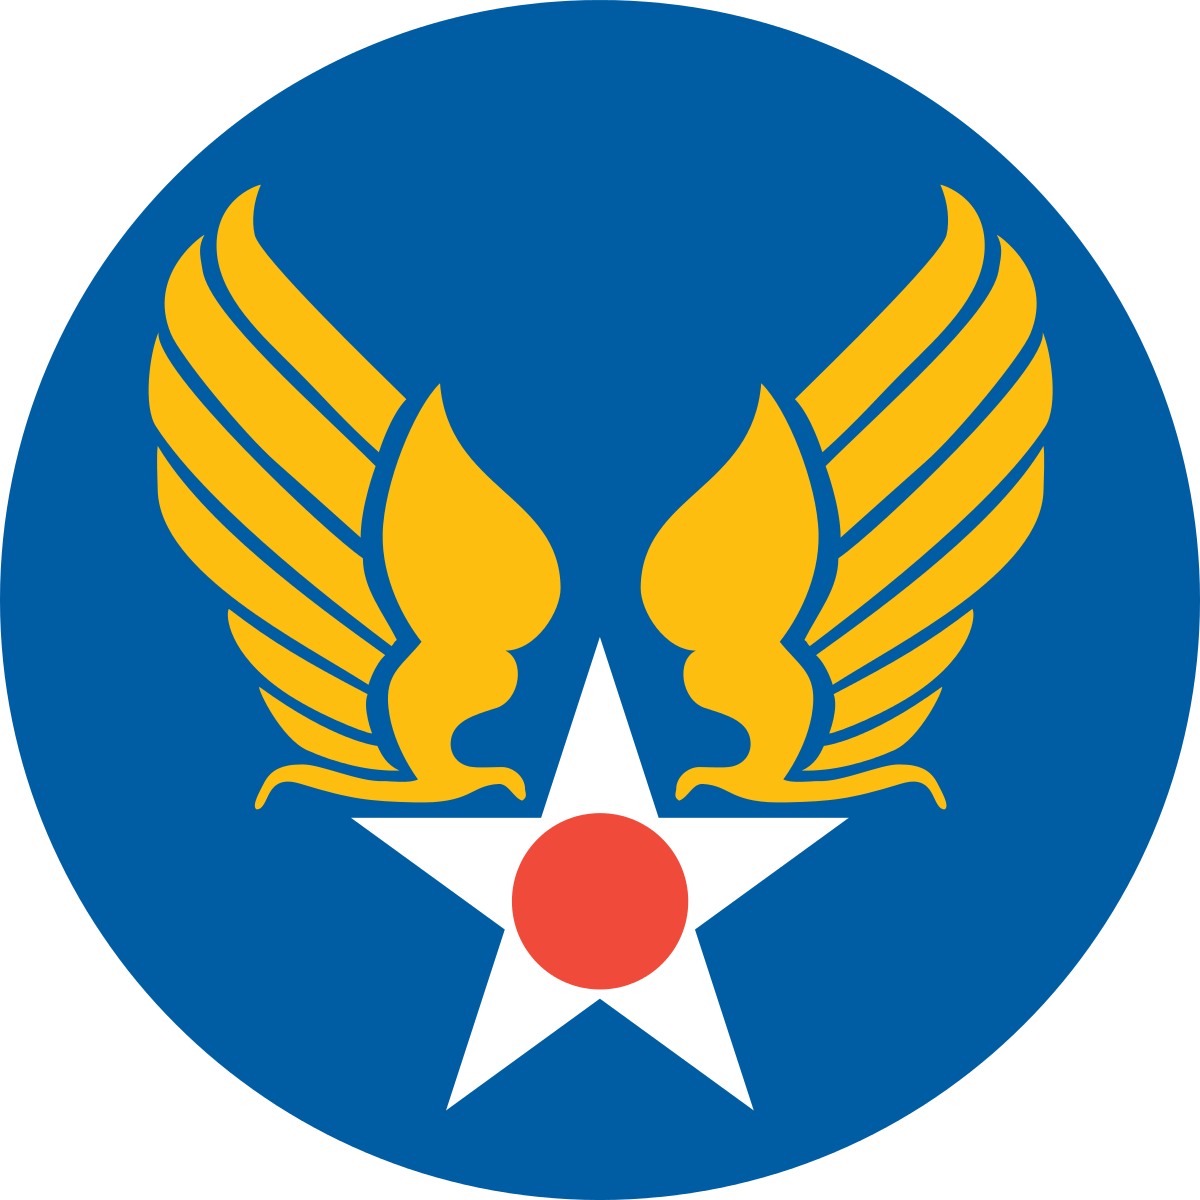 Air Force Logo - United States Army Air Forces